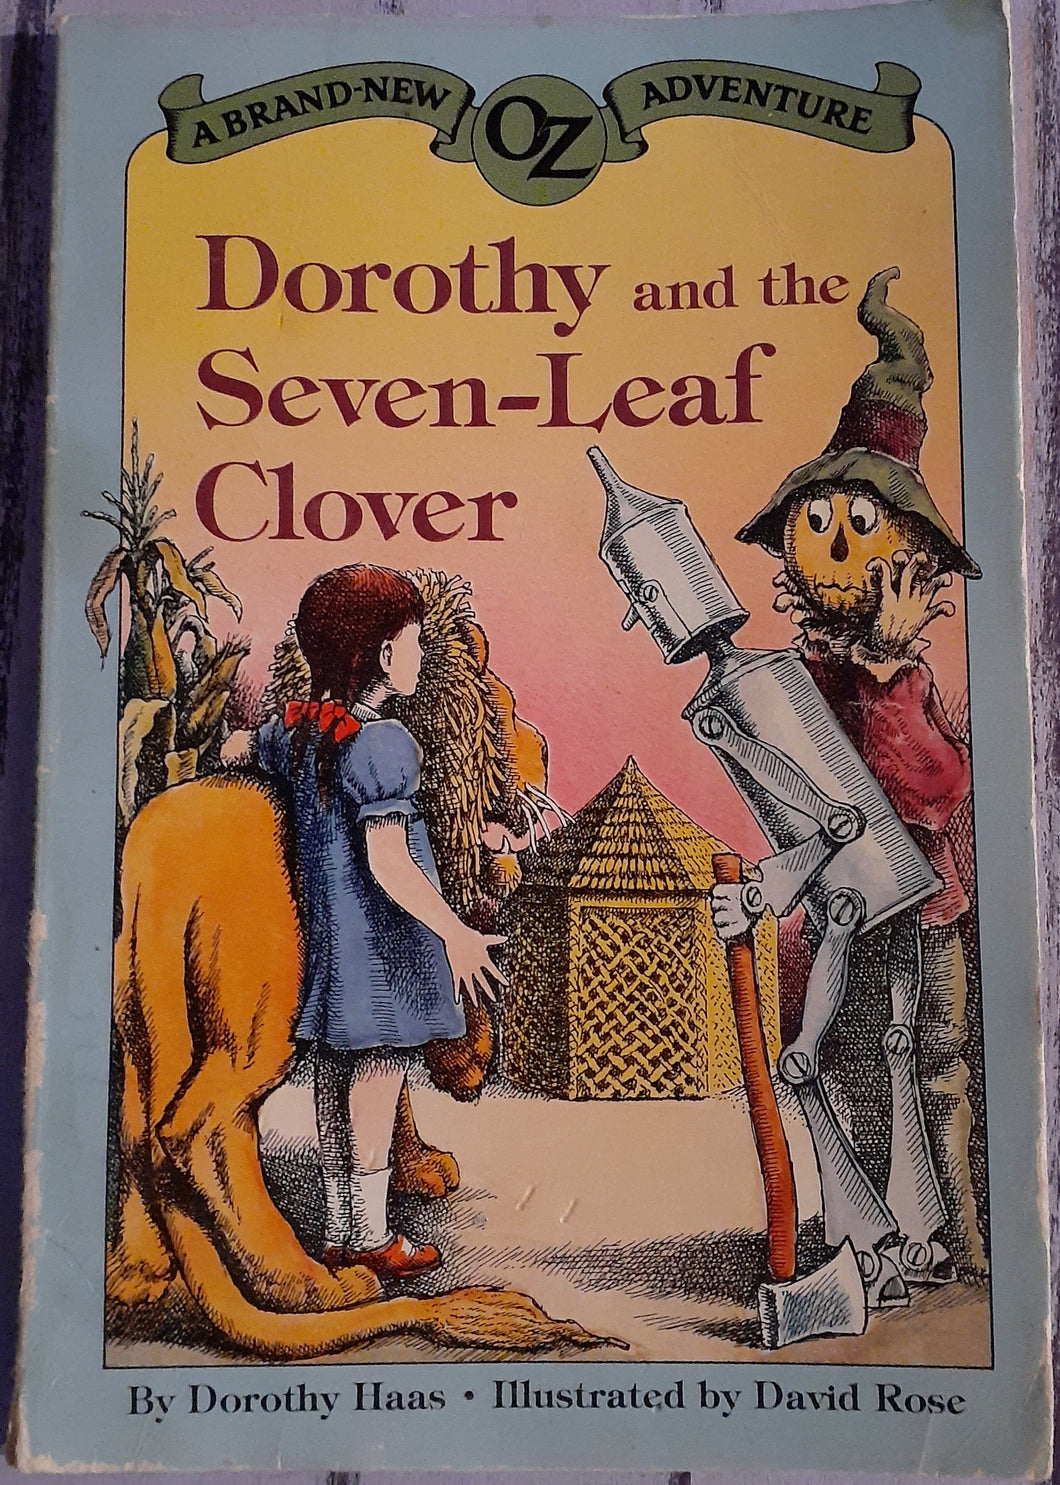 A Brand New Oz Adventure - Dorothy and the Seven-Leaf-Clover